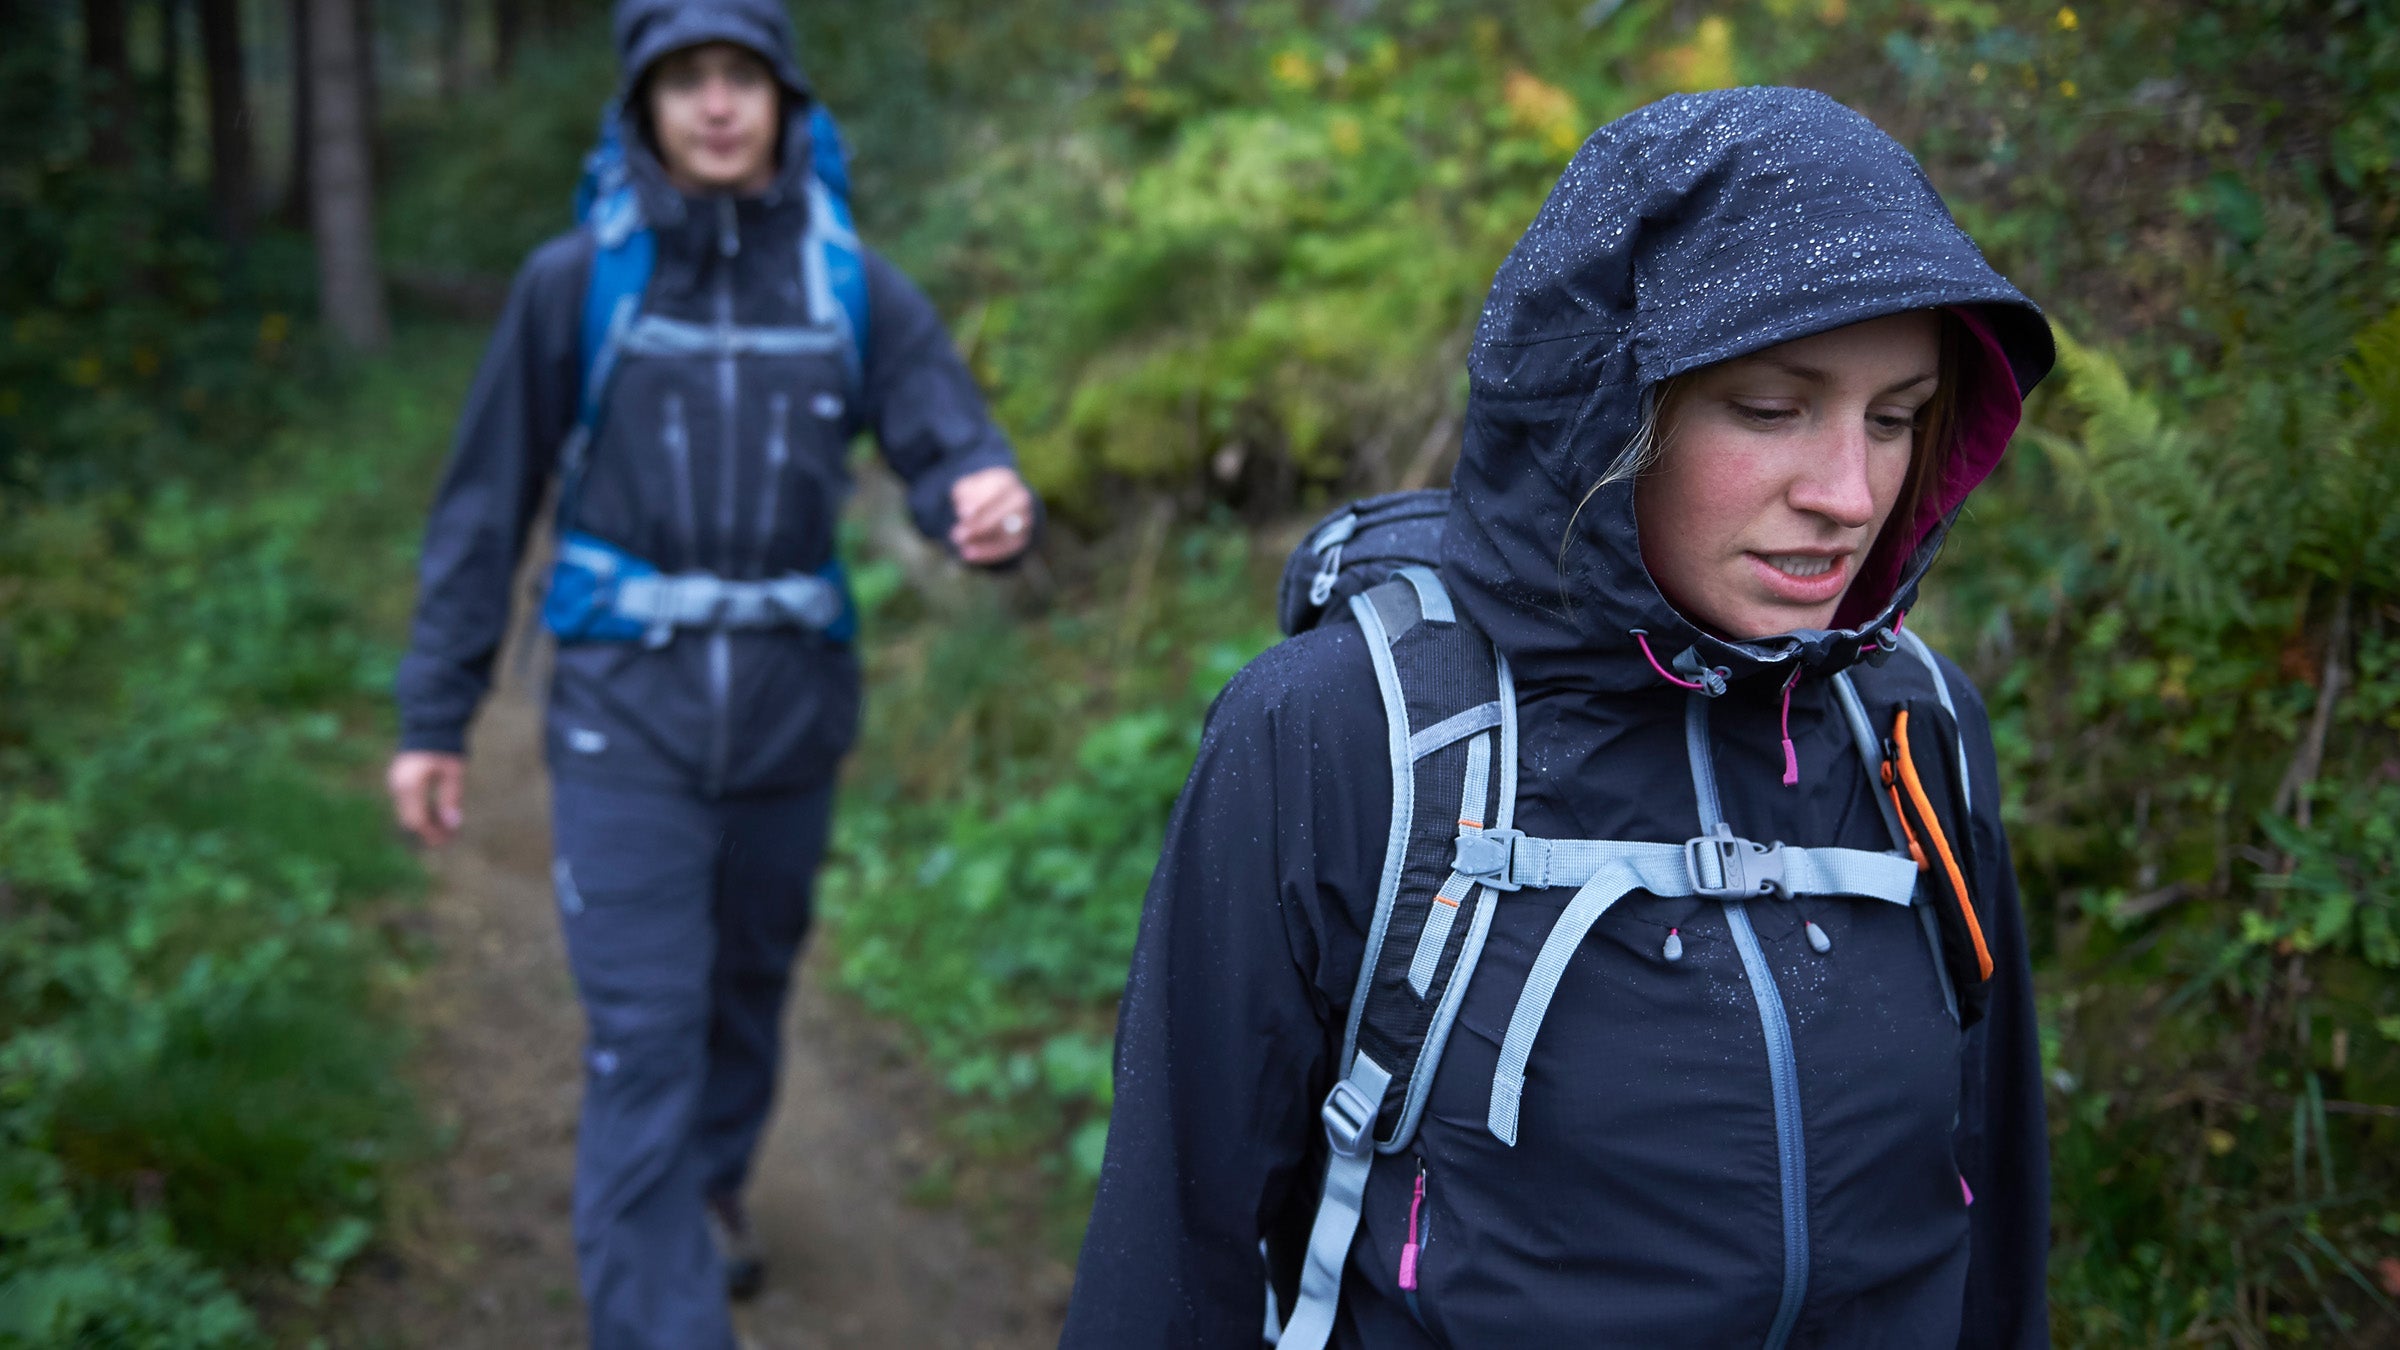 Where to Find PFAS-Free Hiking and Outdoor Clothing and Gear